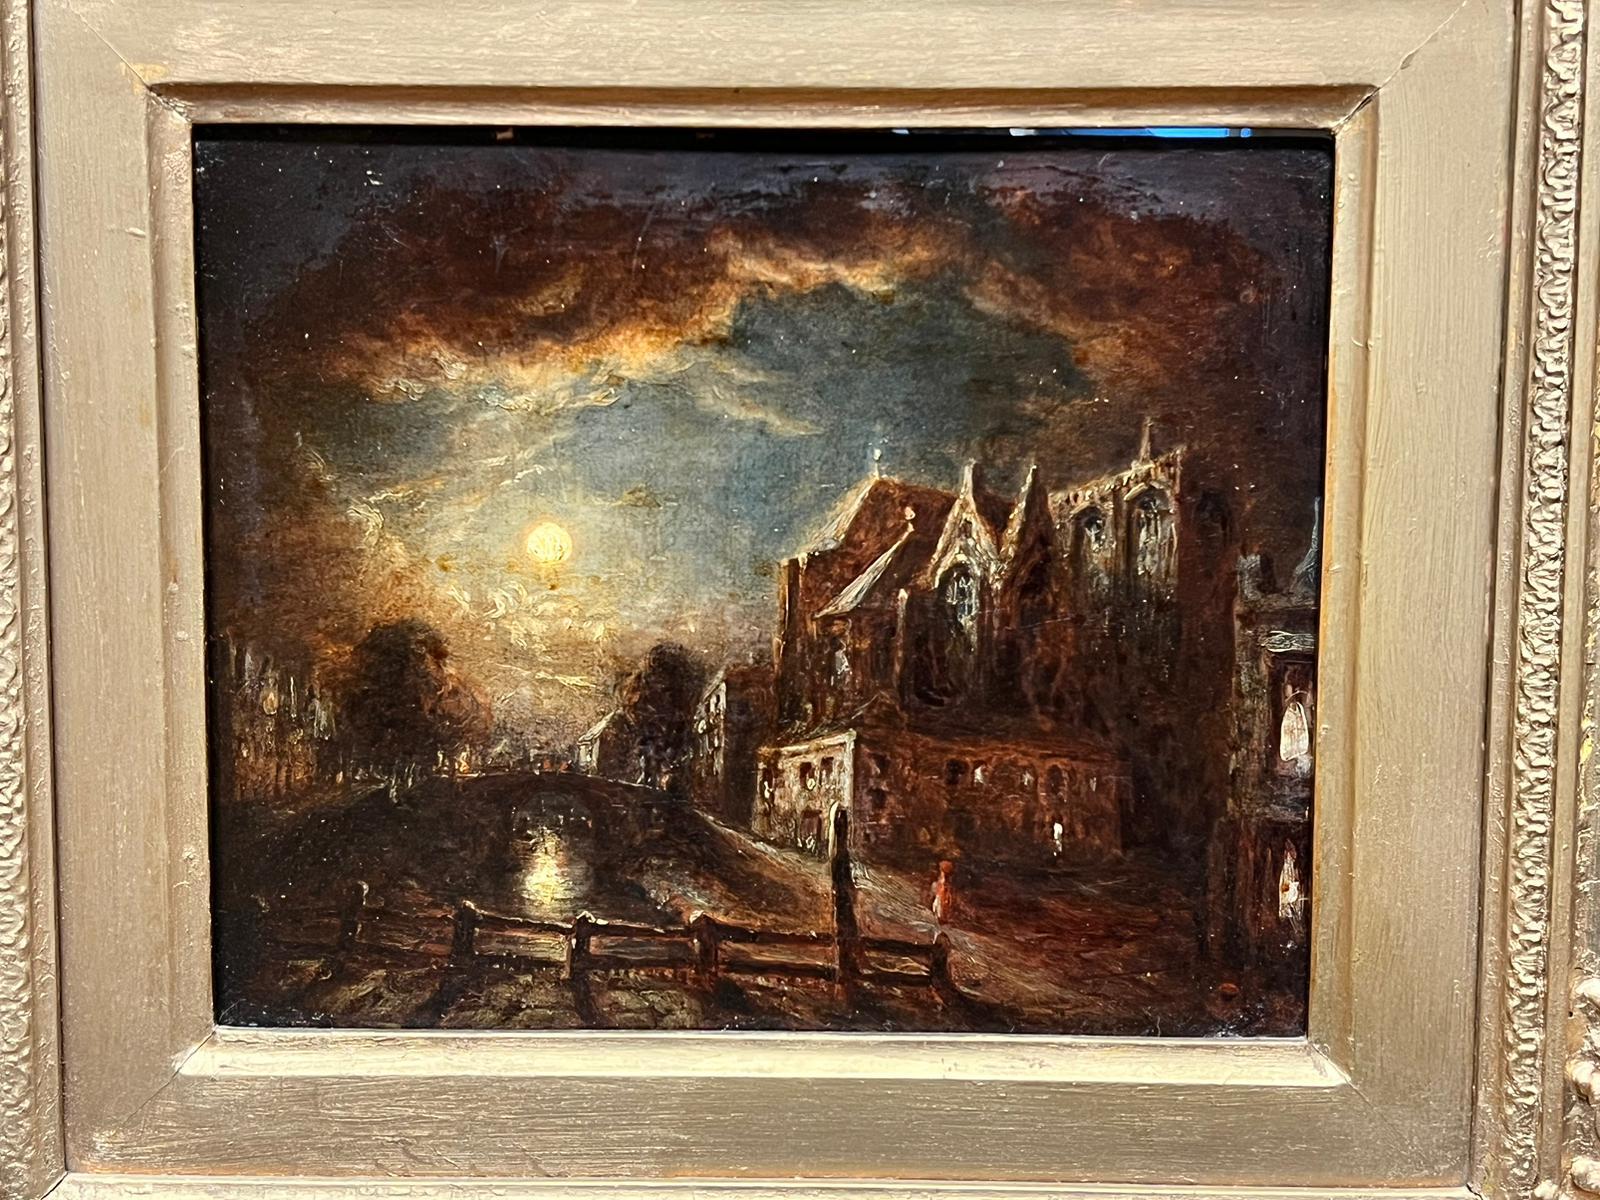 Moonlit Canal
Dutch School (late 19th century)
oil on board, framed
framed: 15 x 16 inches
painting: 8 x 10 inches
provenance: private collection UK
The painting is in good and presentable condition. Please note, we do not warranty the condition of